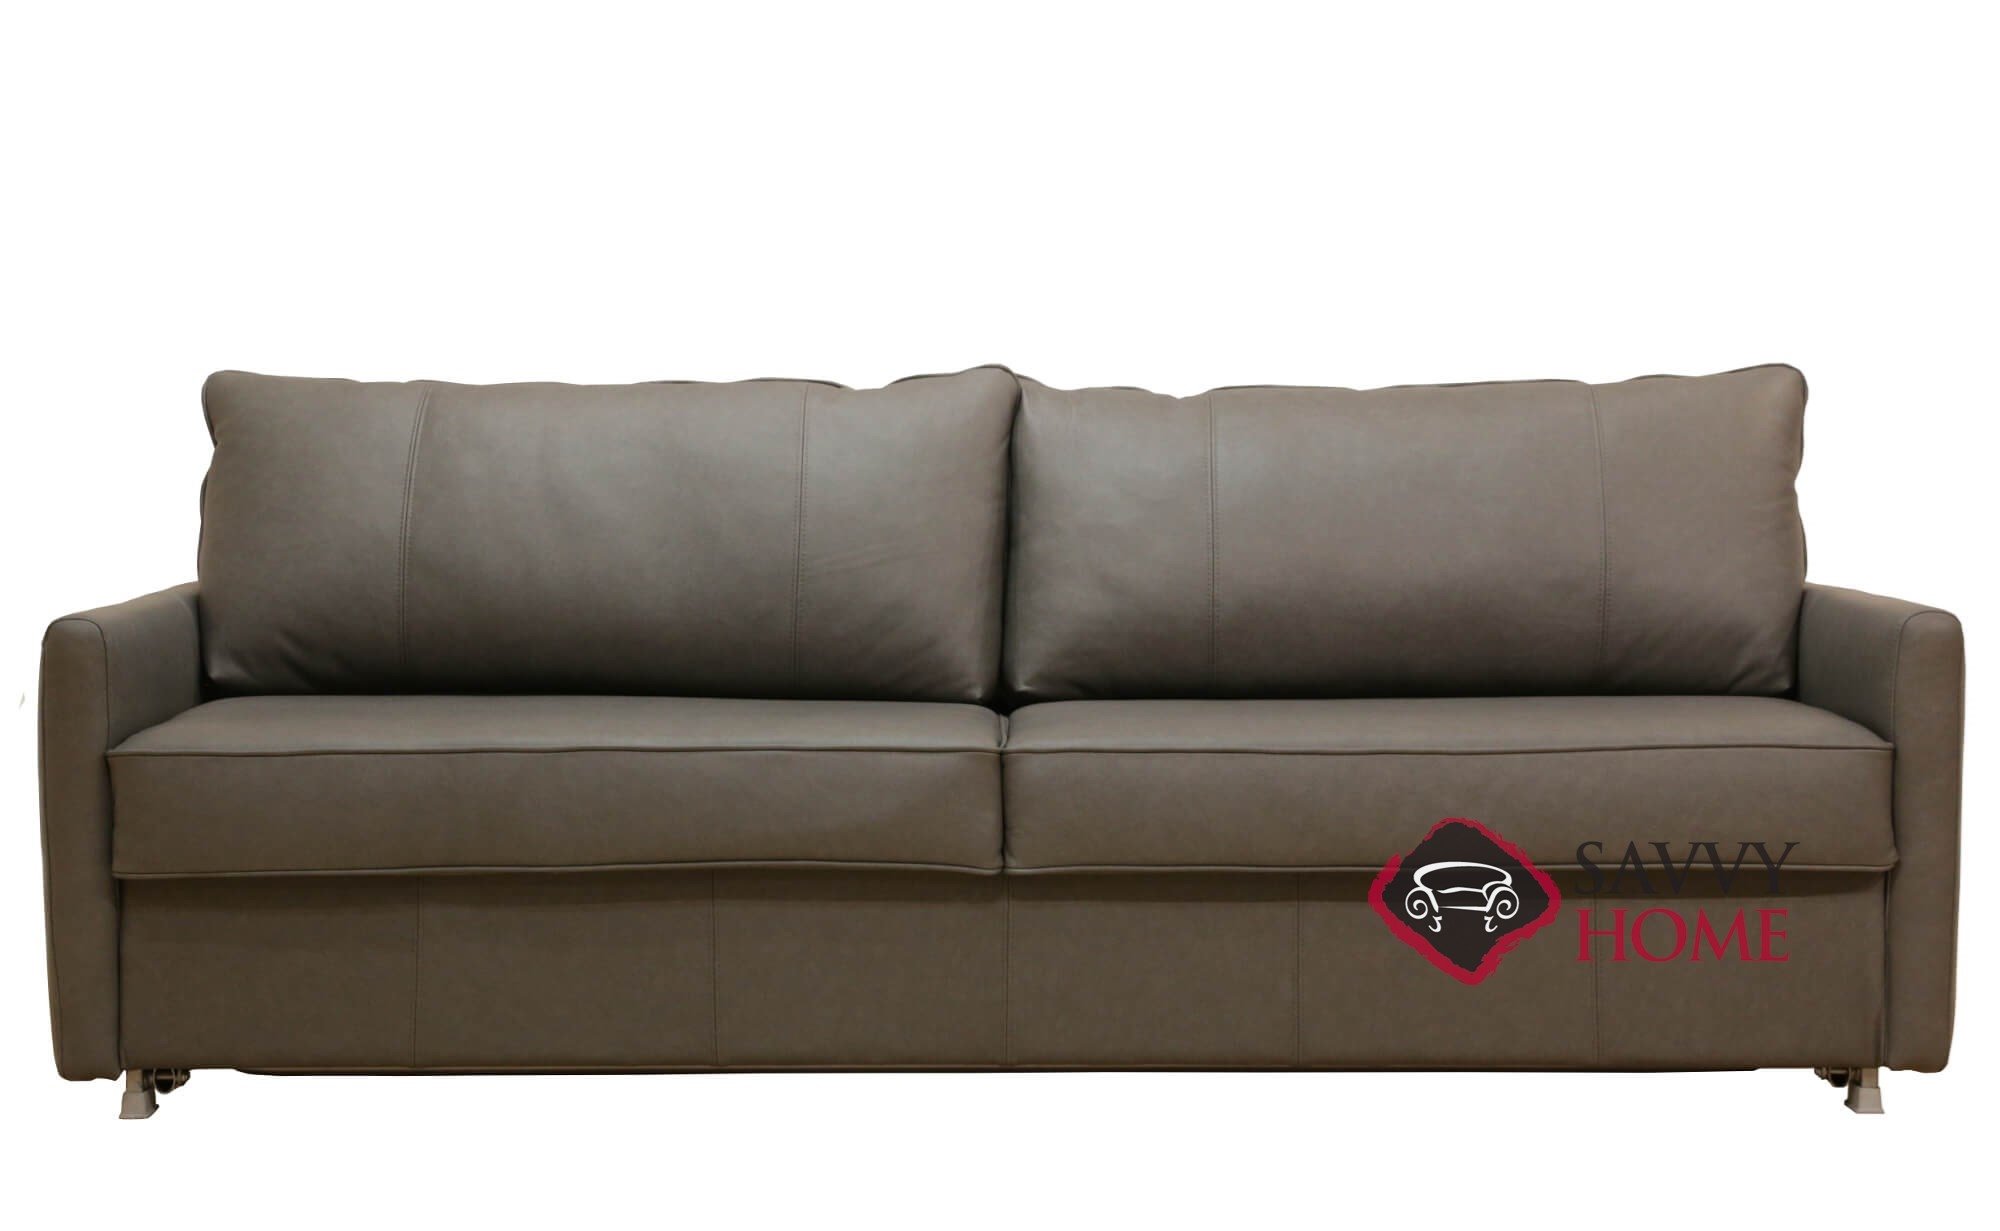 Elevate Leather Sleeper Sofas Queen By